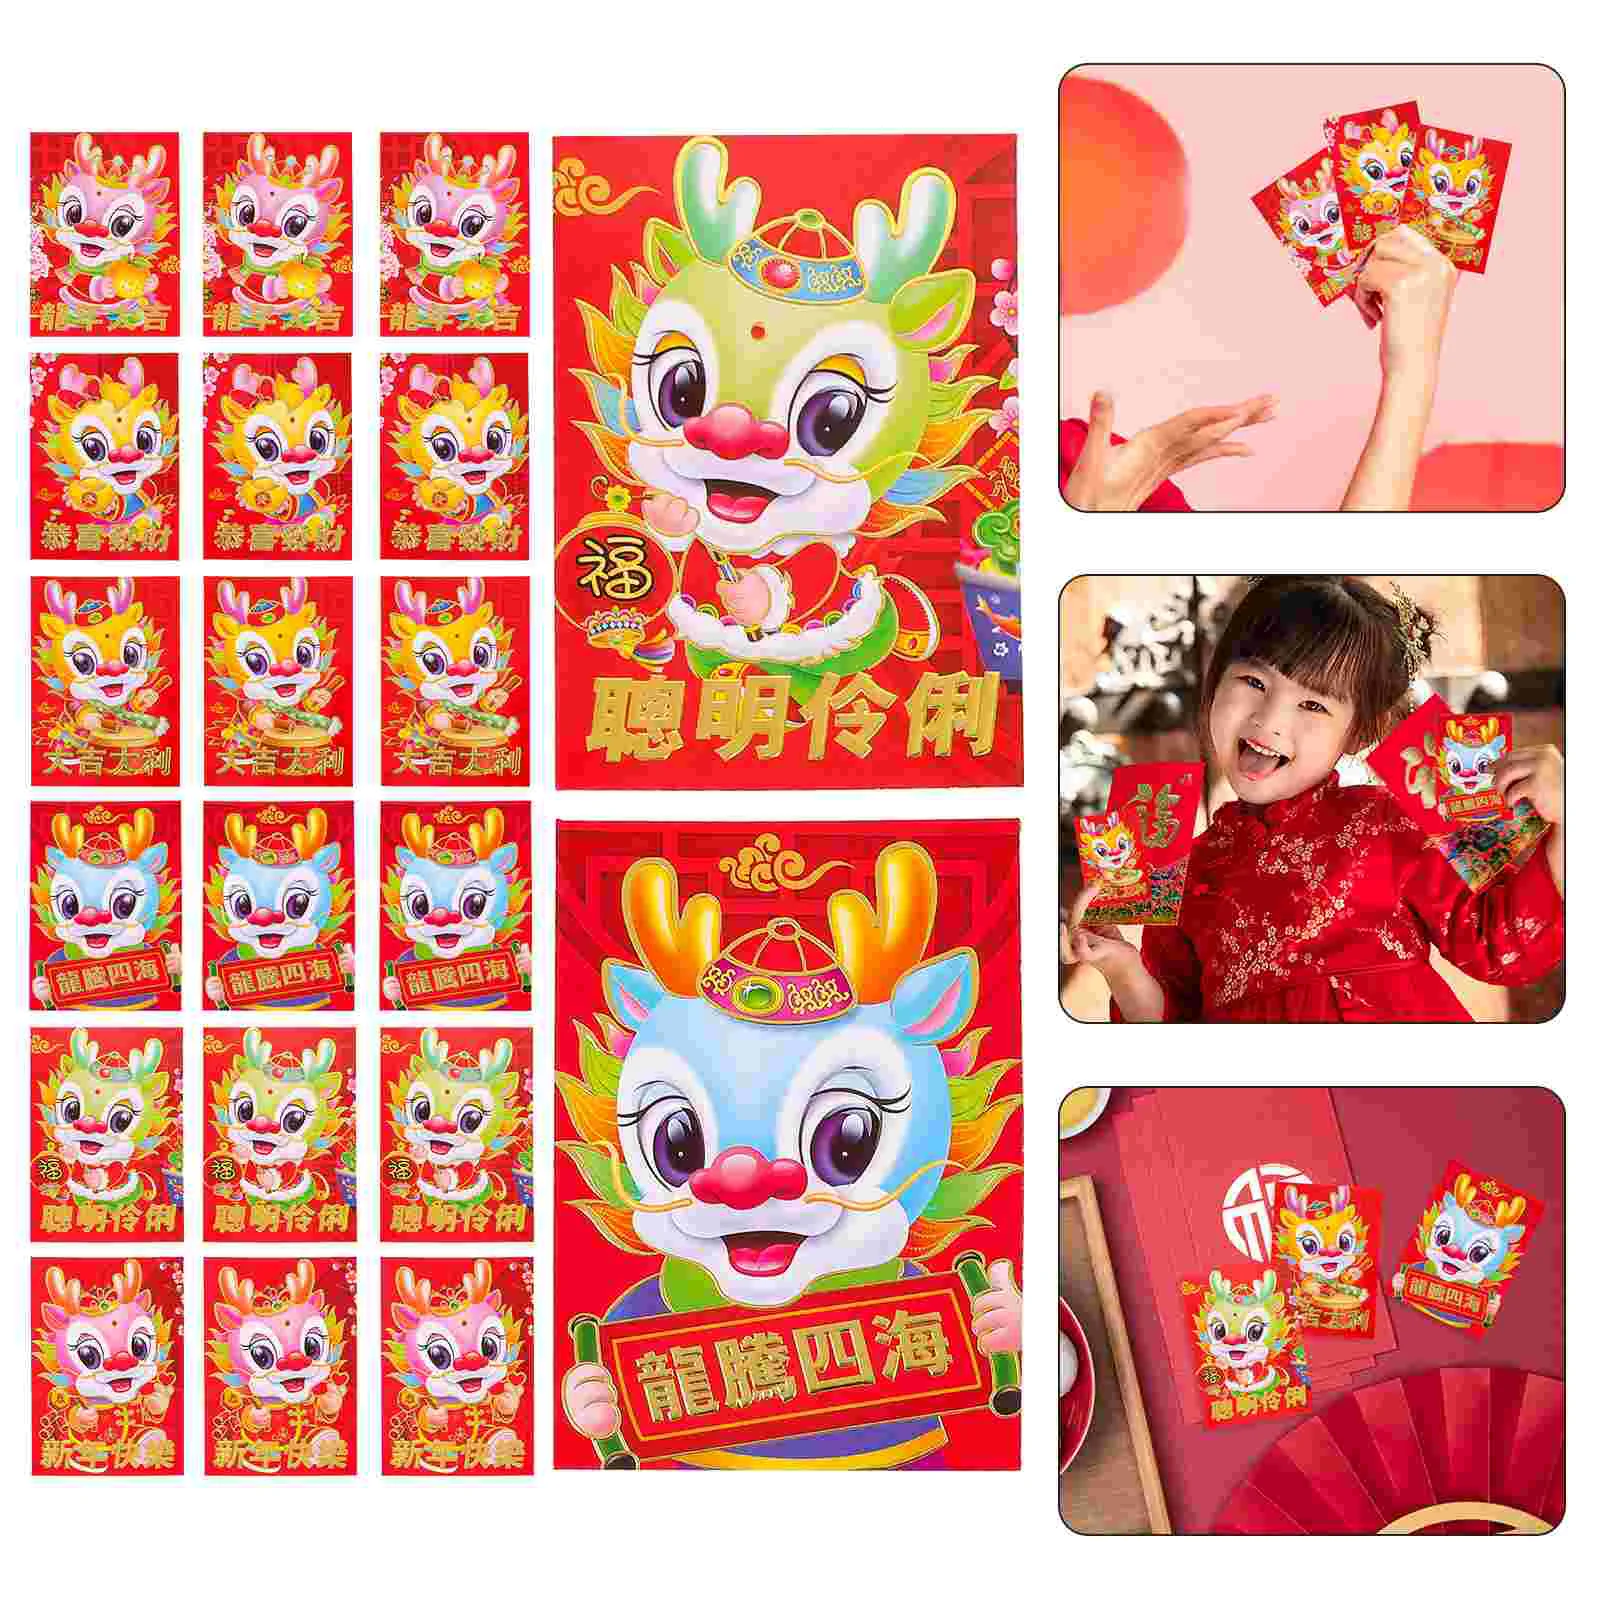 

30 Pcs The Gift New Year Red Packet Traditional Pocket Chinese Dragon Envelope Three-dimensional Paper Luck Money Bag Pockets